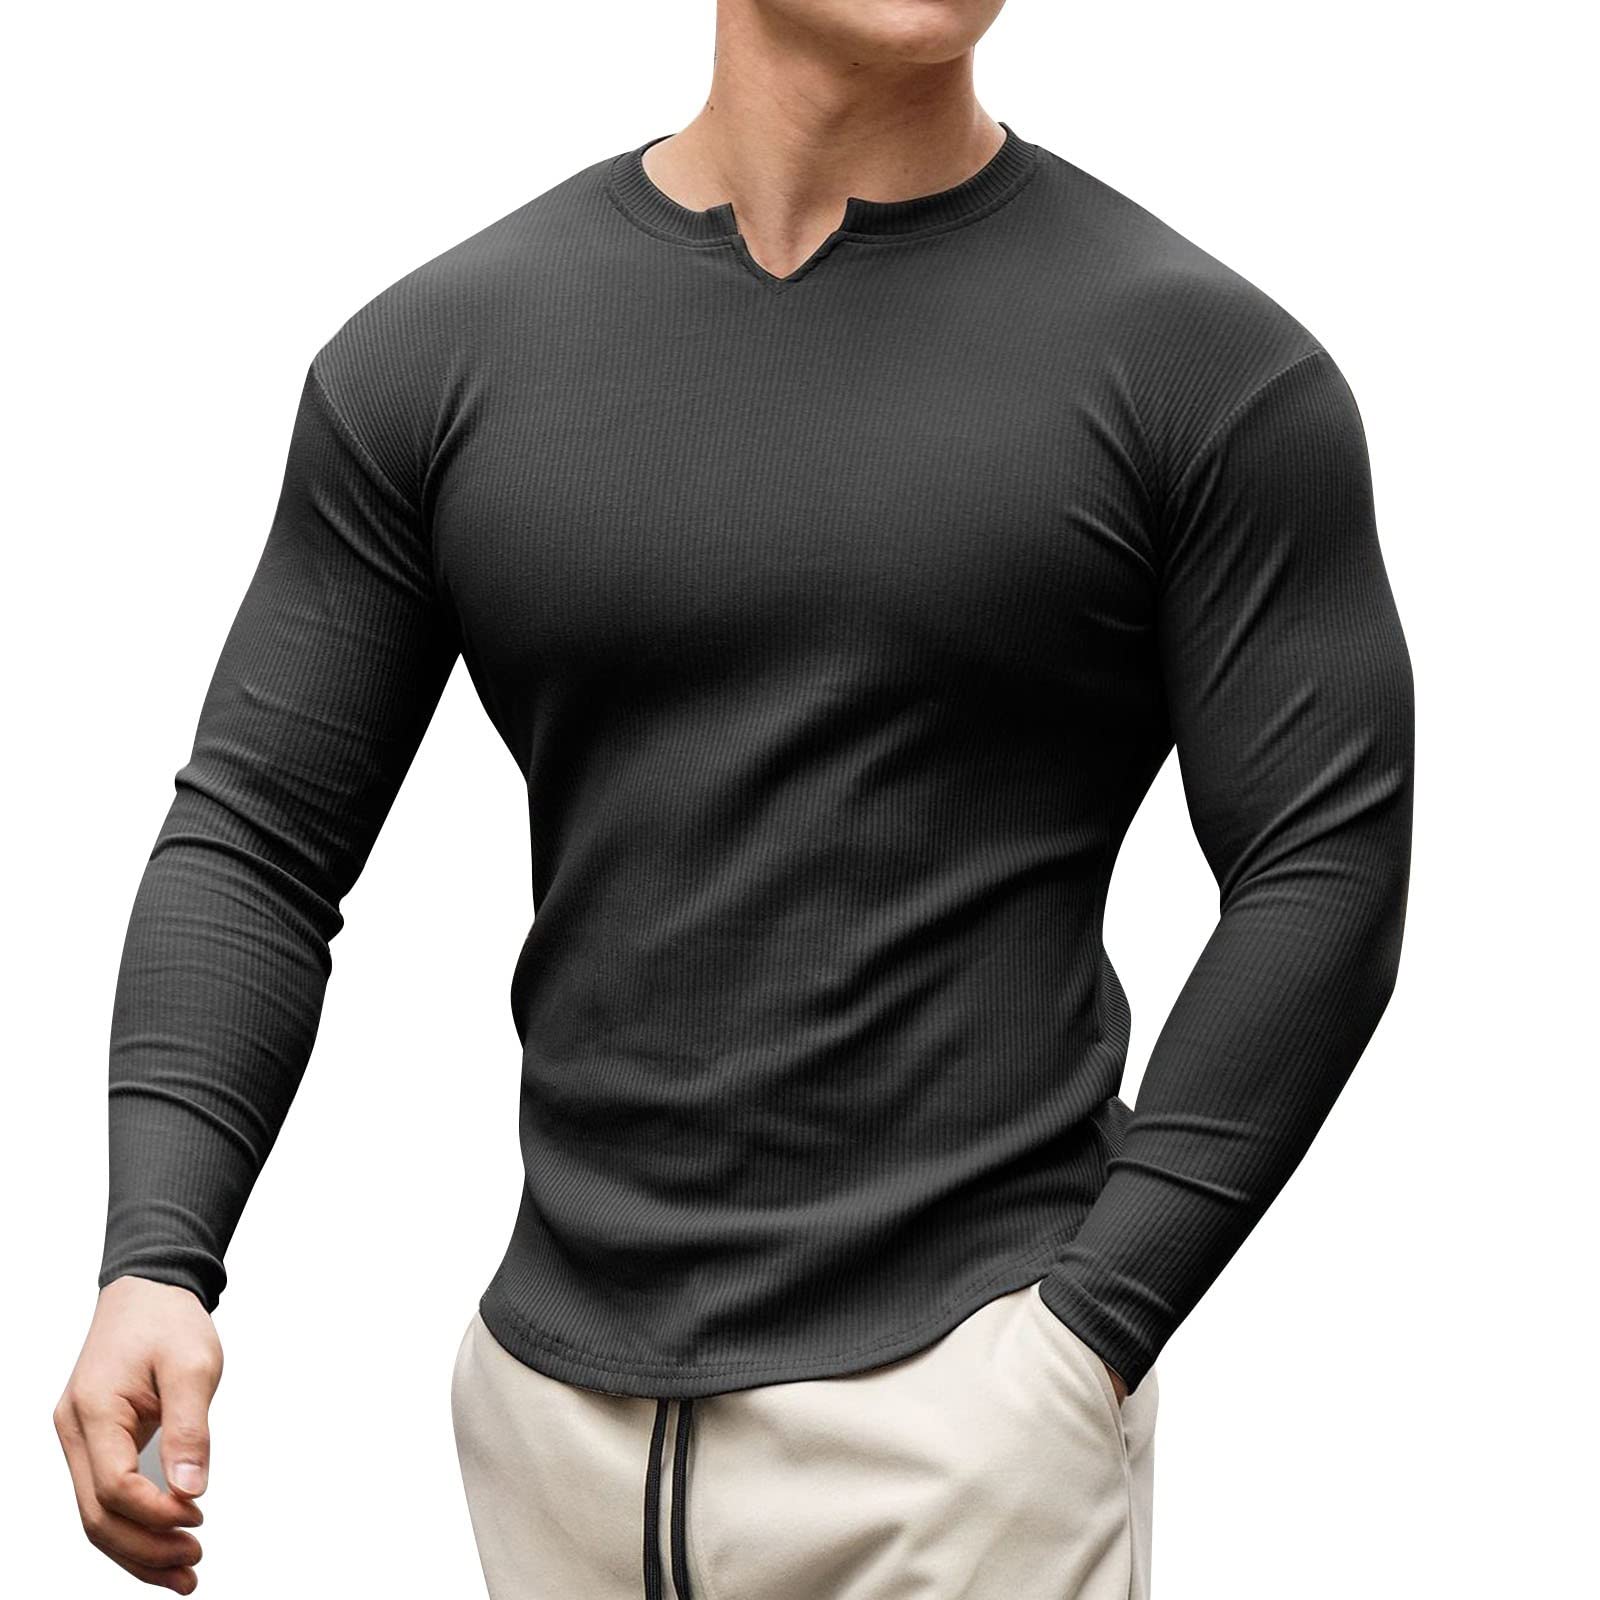 Knit Rib T-shirts Muscle Slim Fit Henley V Neck Tops Athletic Gym Workout Long Sleeve Tshirt Black 3X-Large